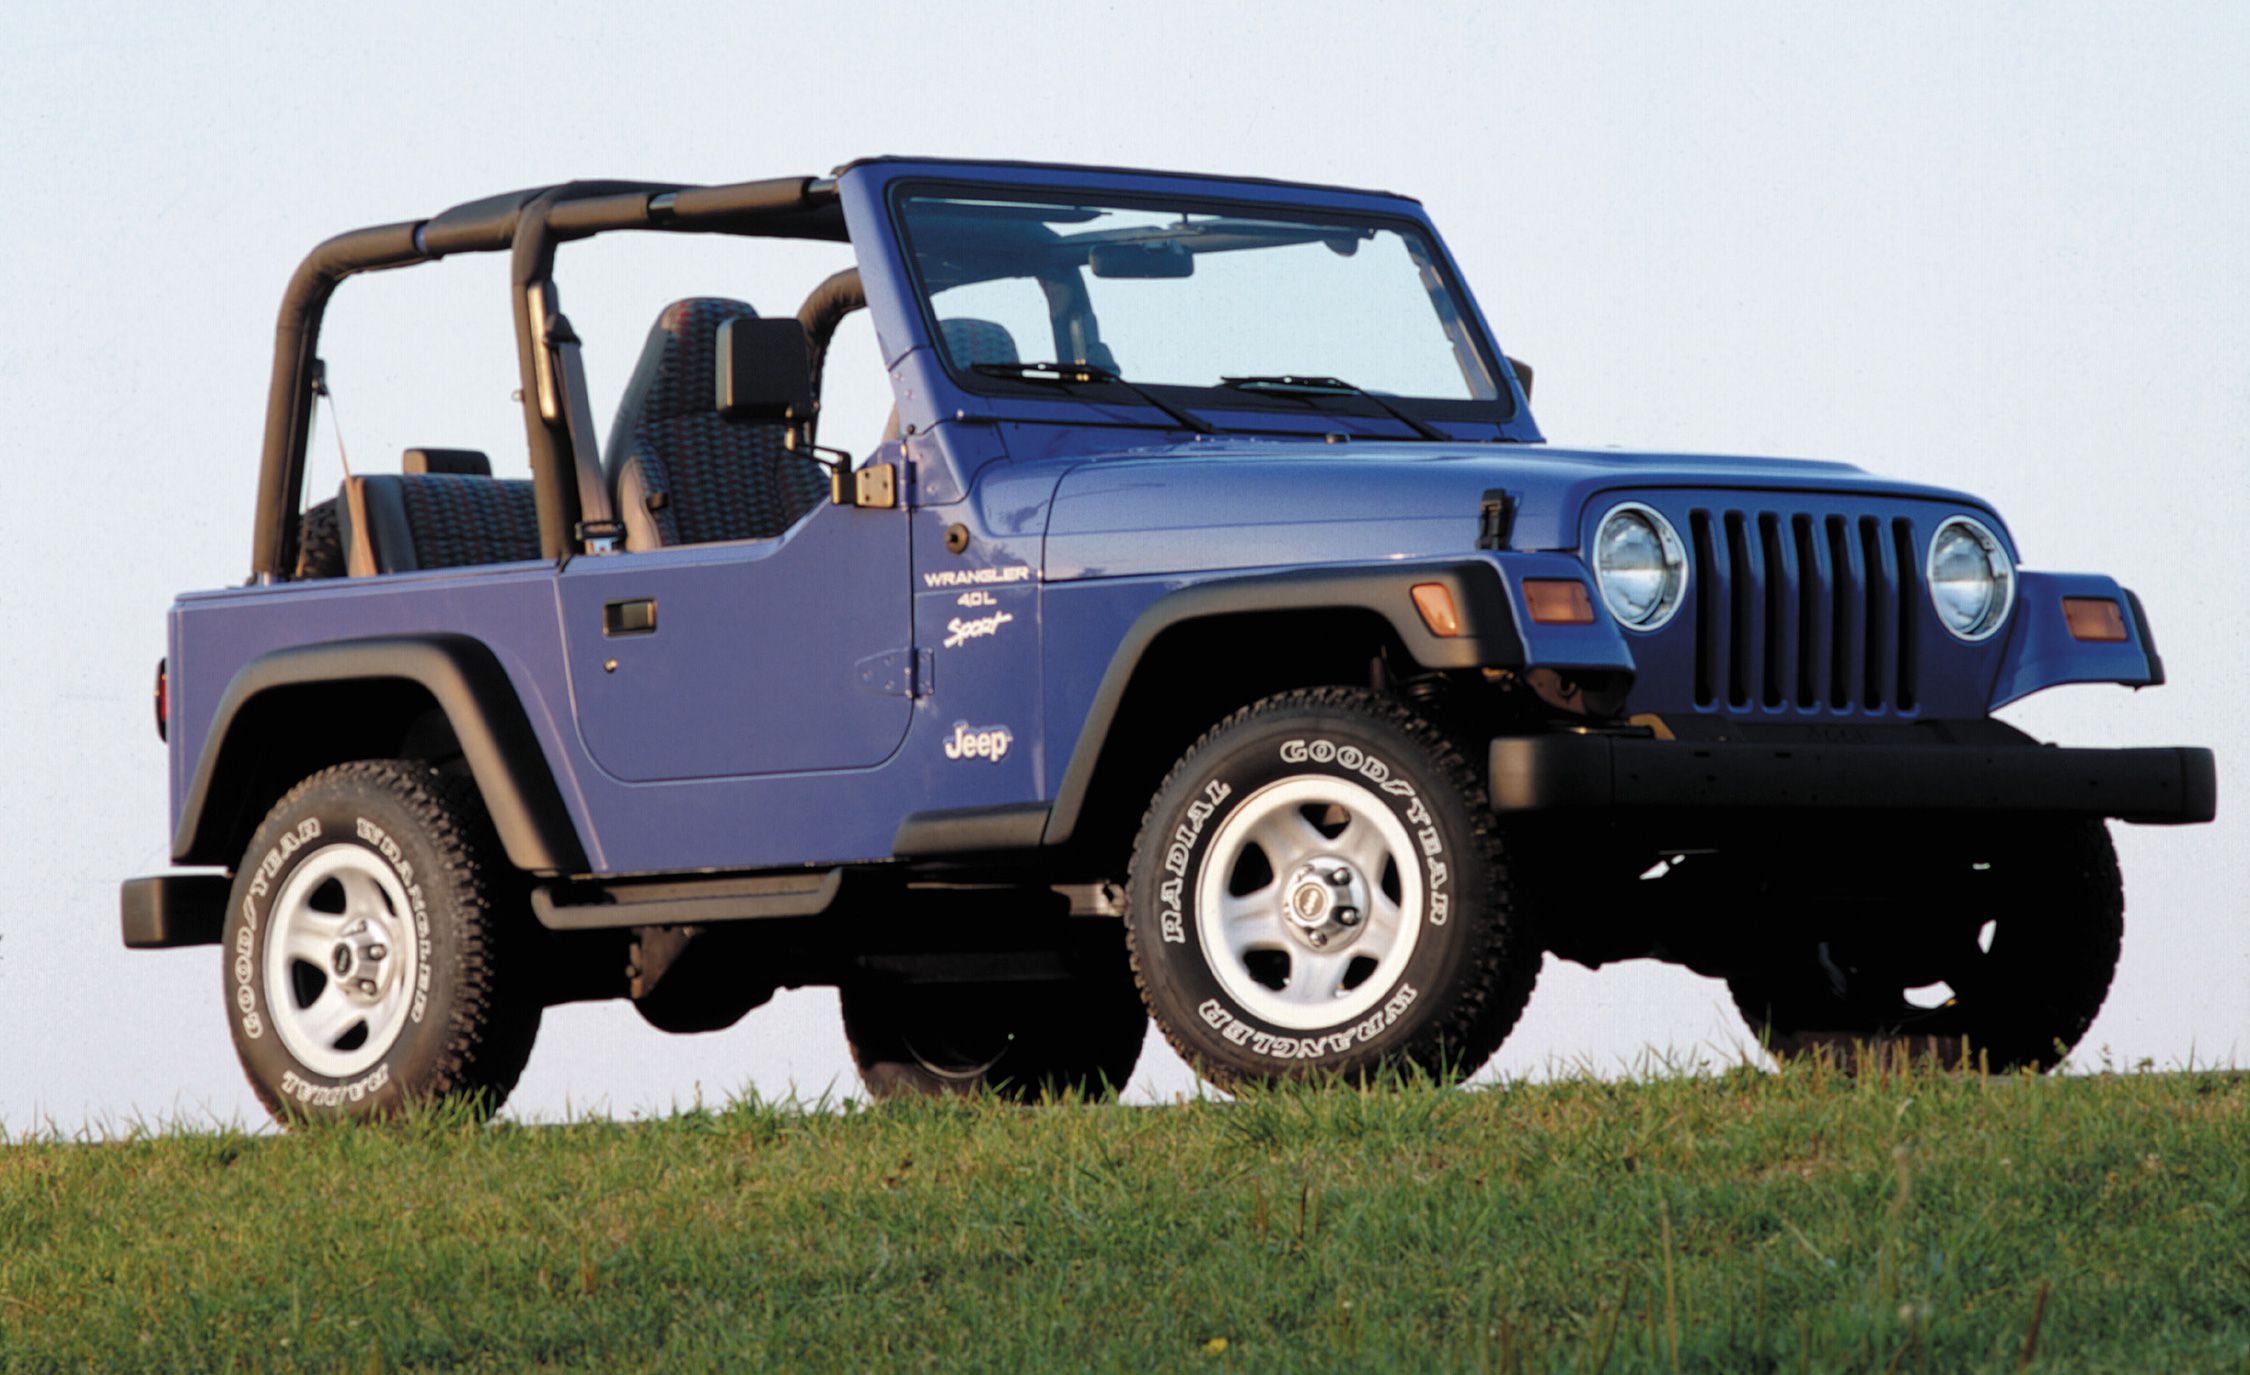 The Complete Visual History of the Jeep Wrangler, from 1986 to ...